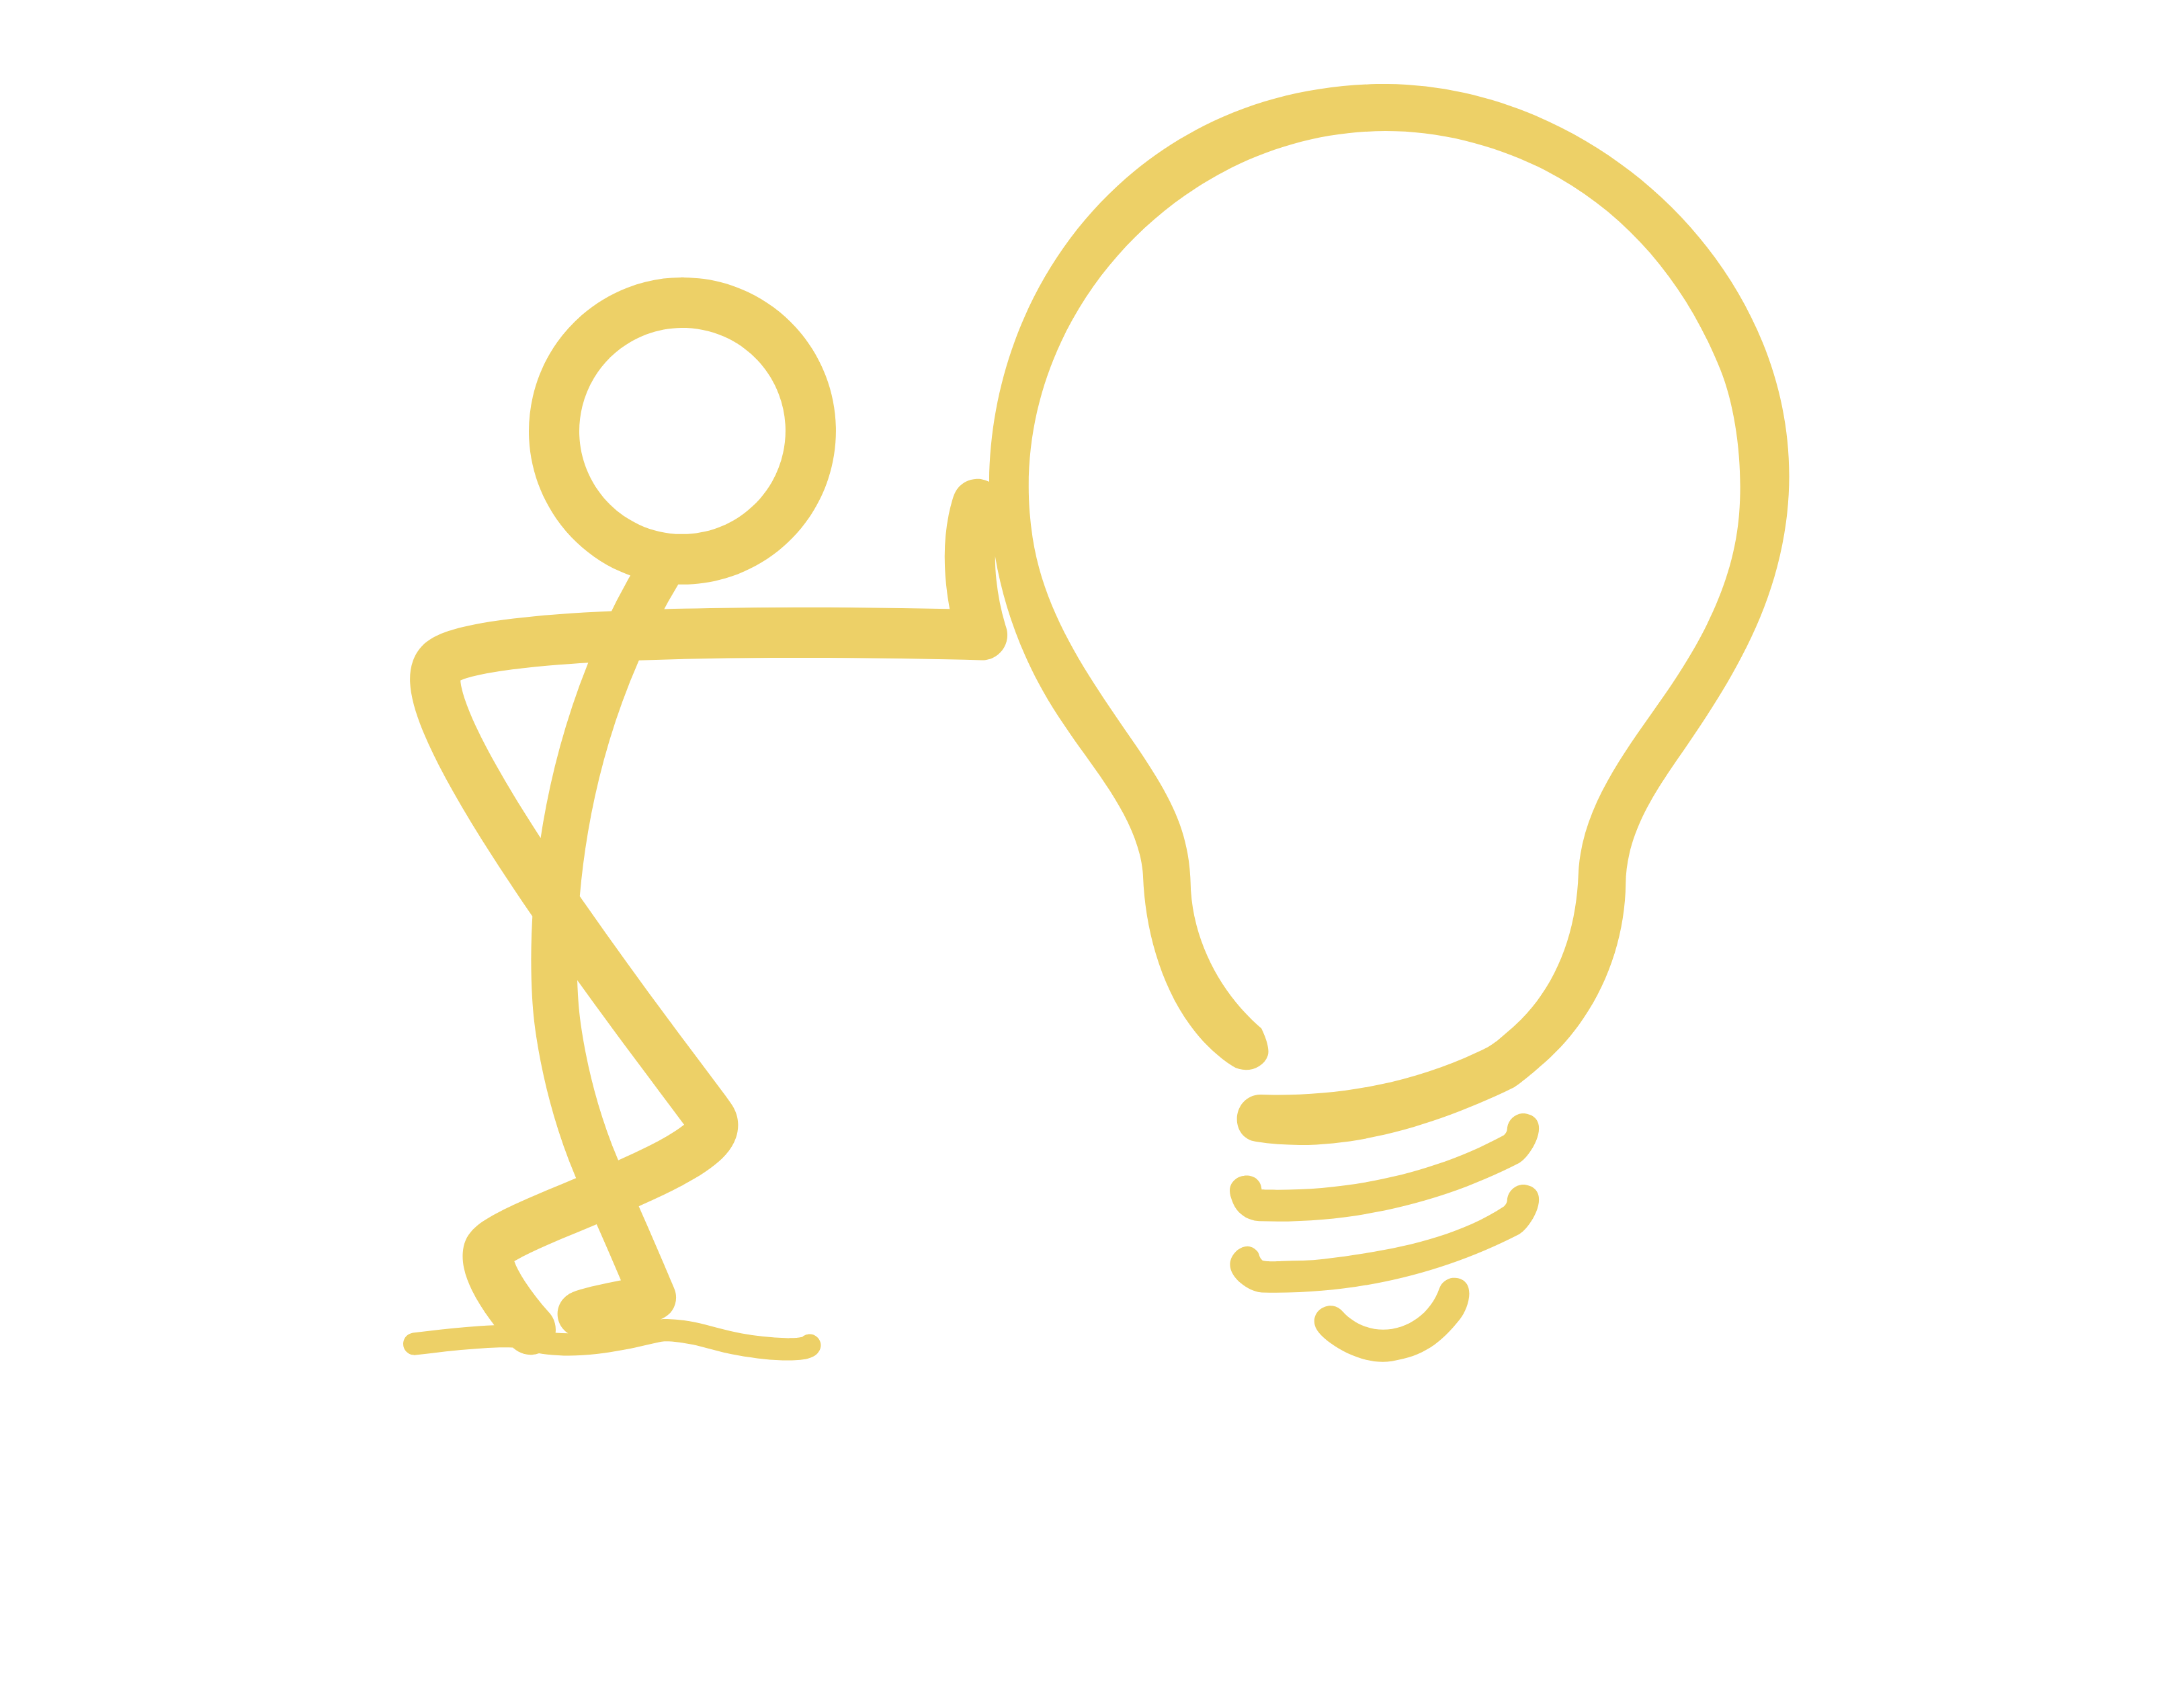 Gerald and Rose Logo - Gerald and Rose About Us